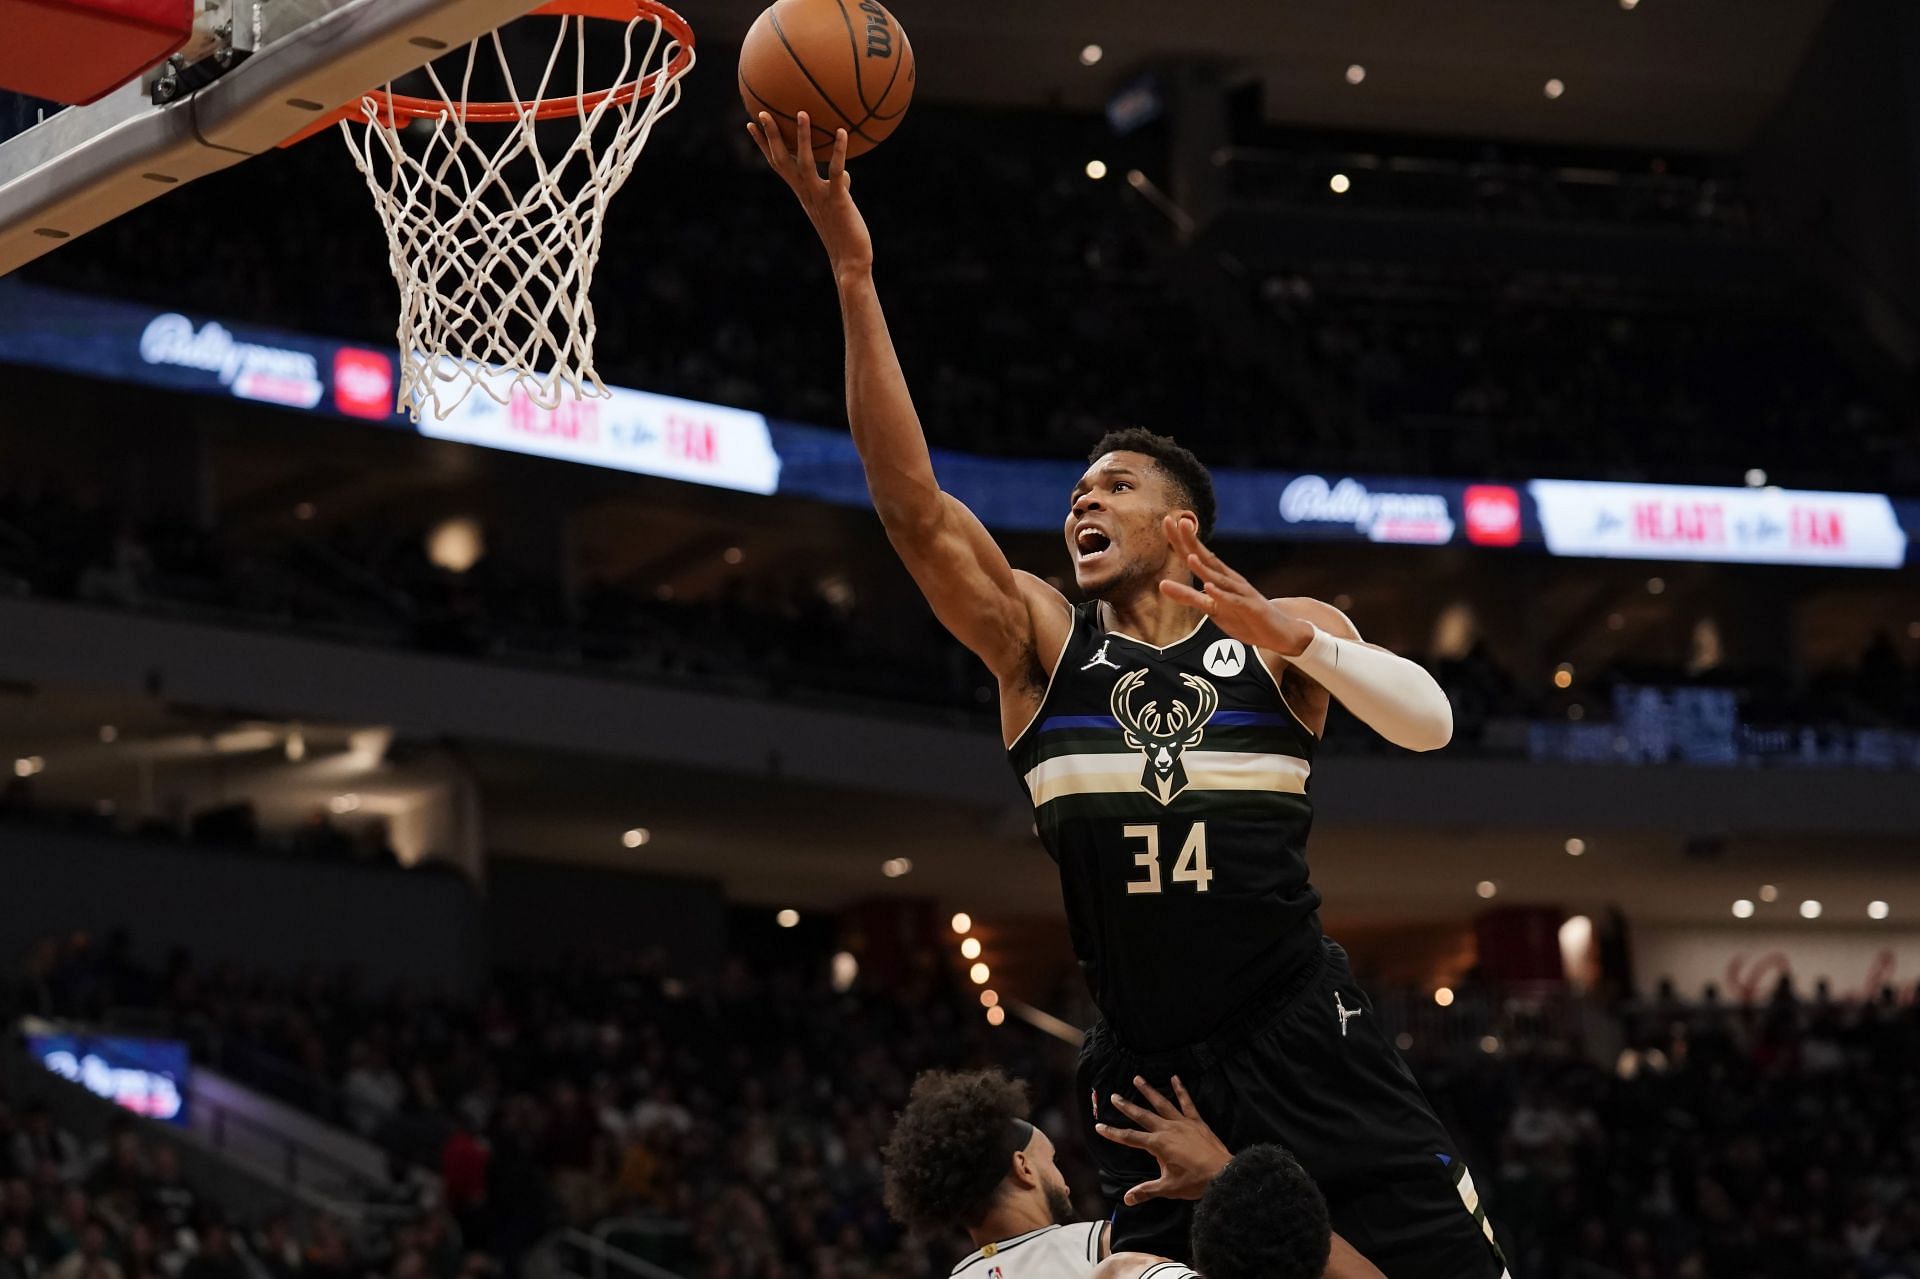 Giannis doing what he does best